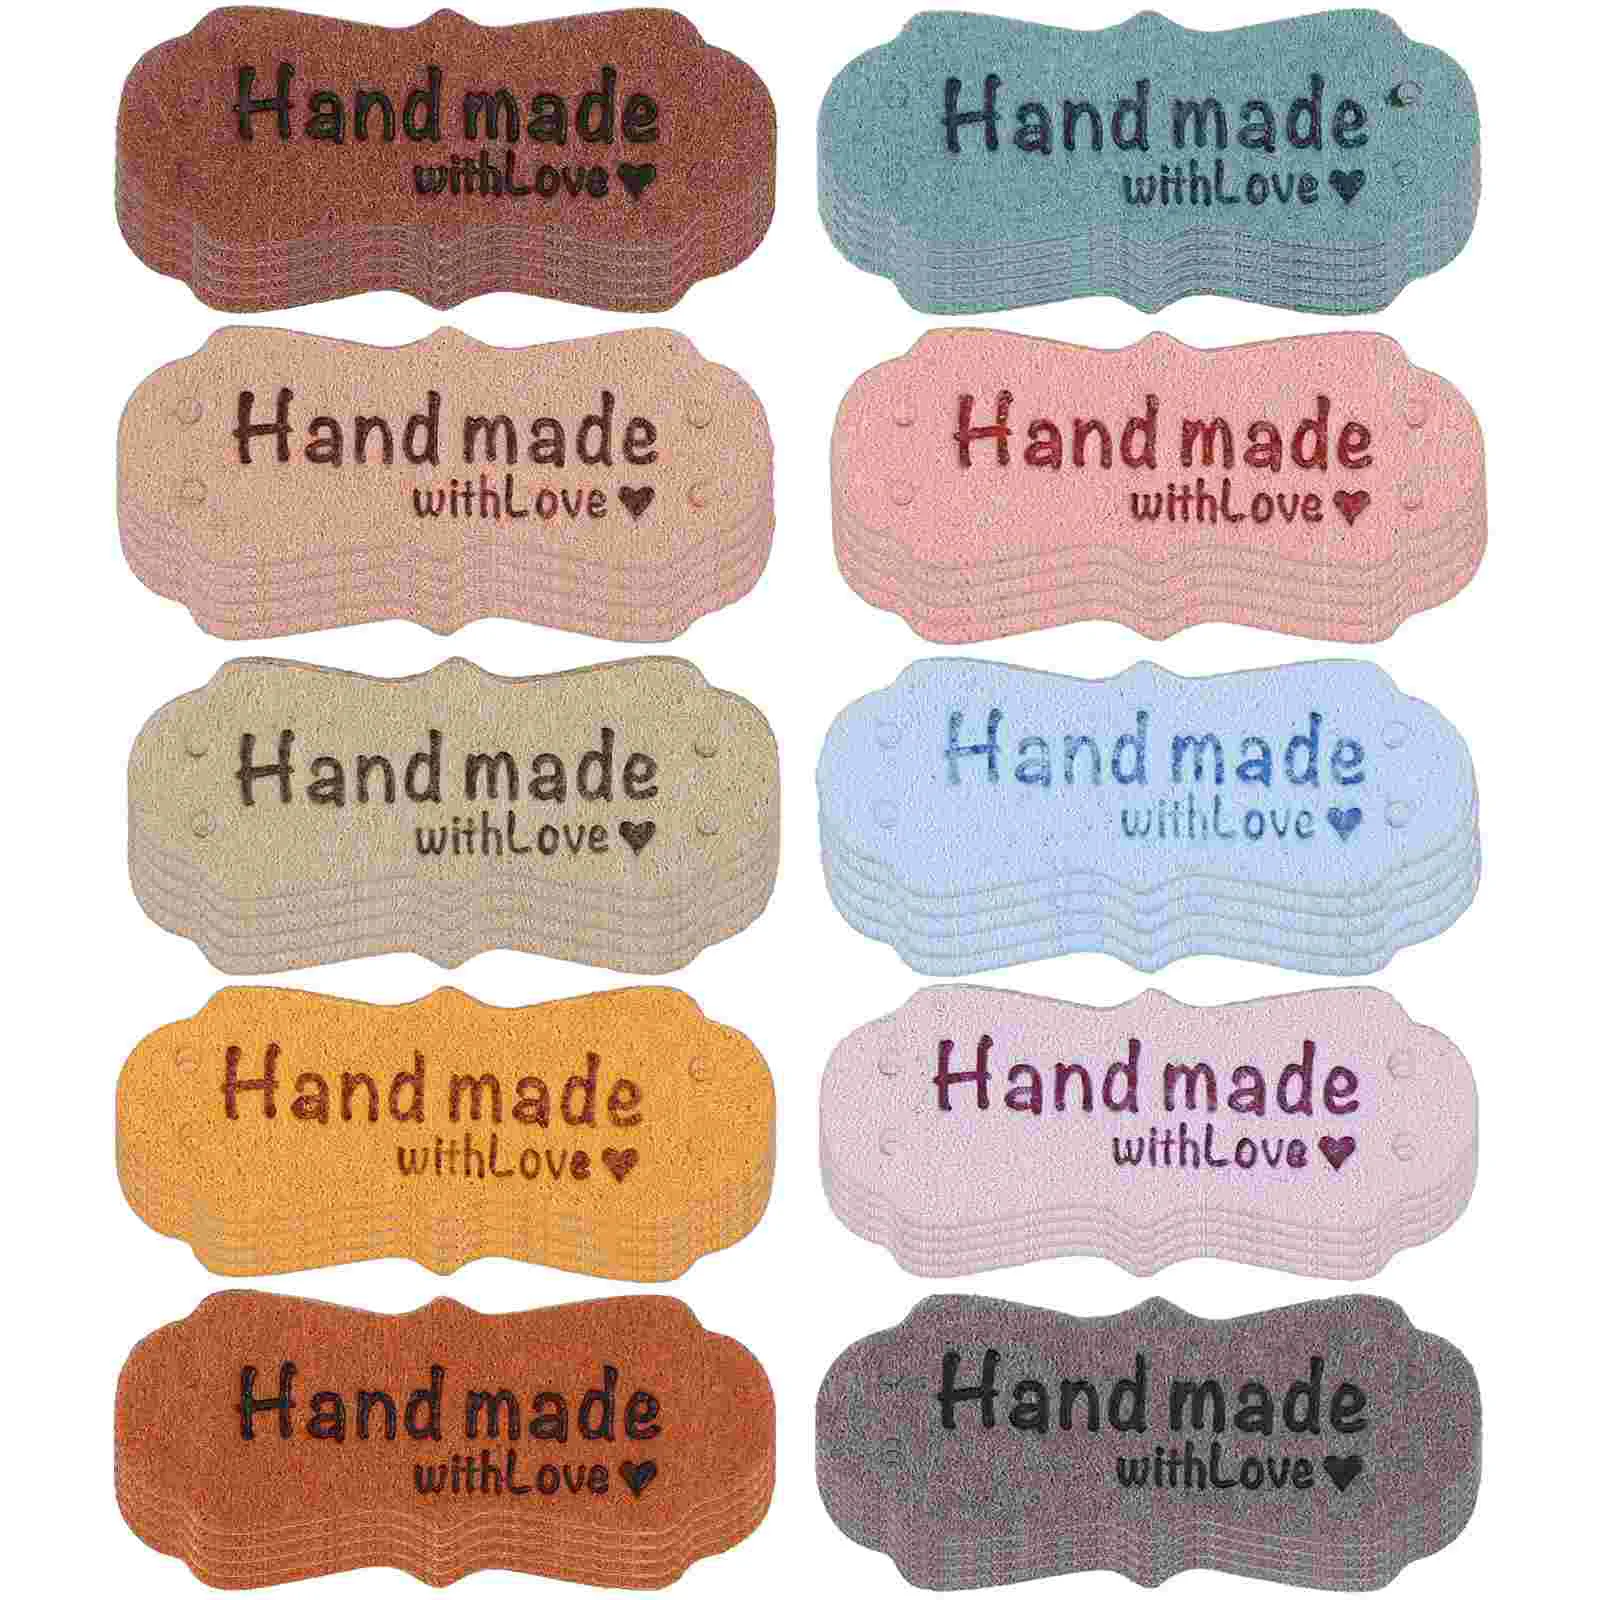 

100 Pcs PU Labels Handmade Embossed Tags Embellishment Knit DIY Accessories for Clothes Bags Shoes Hats